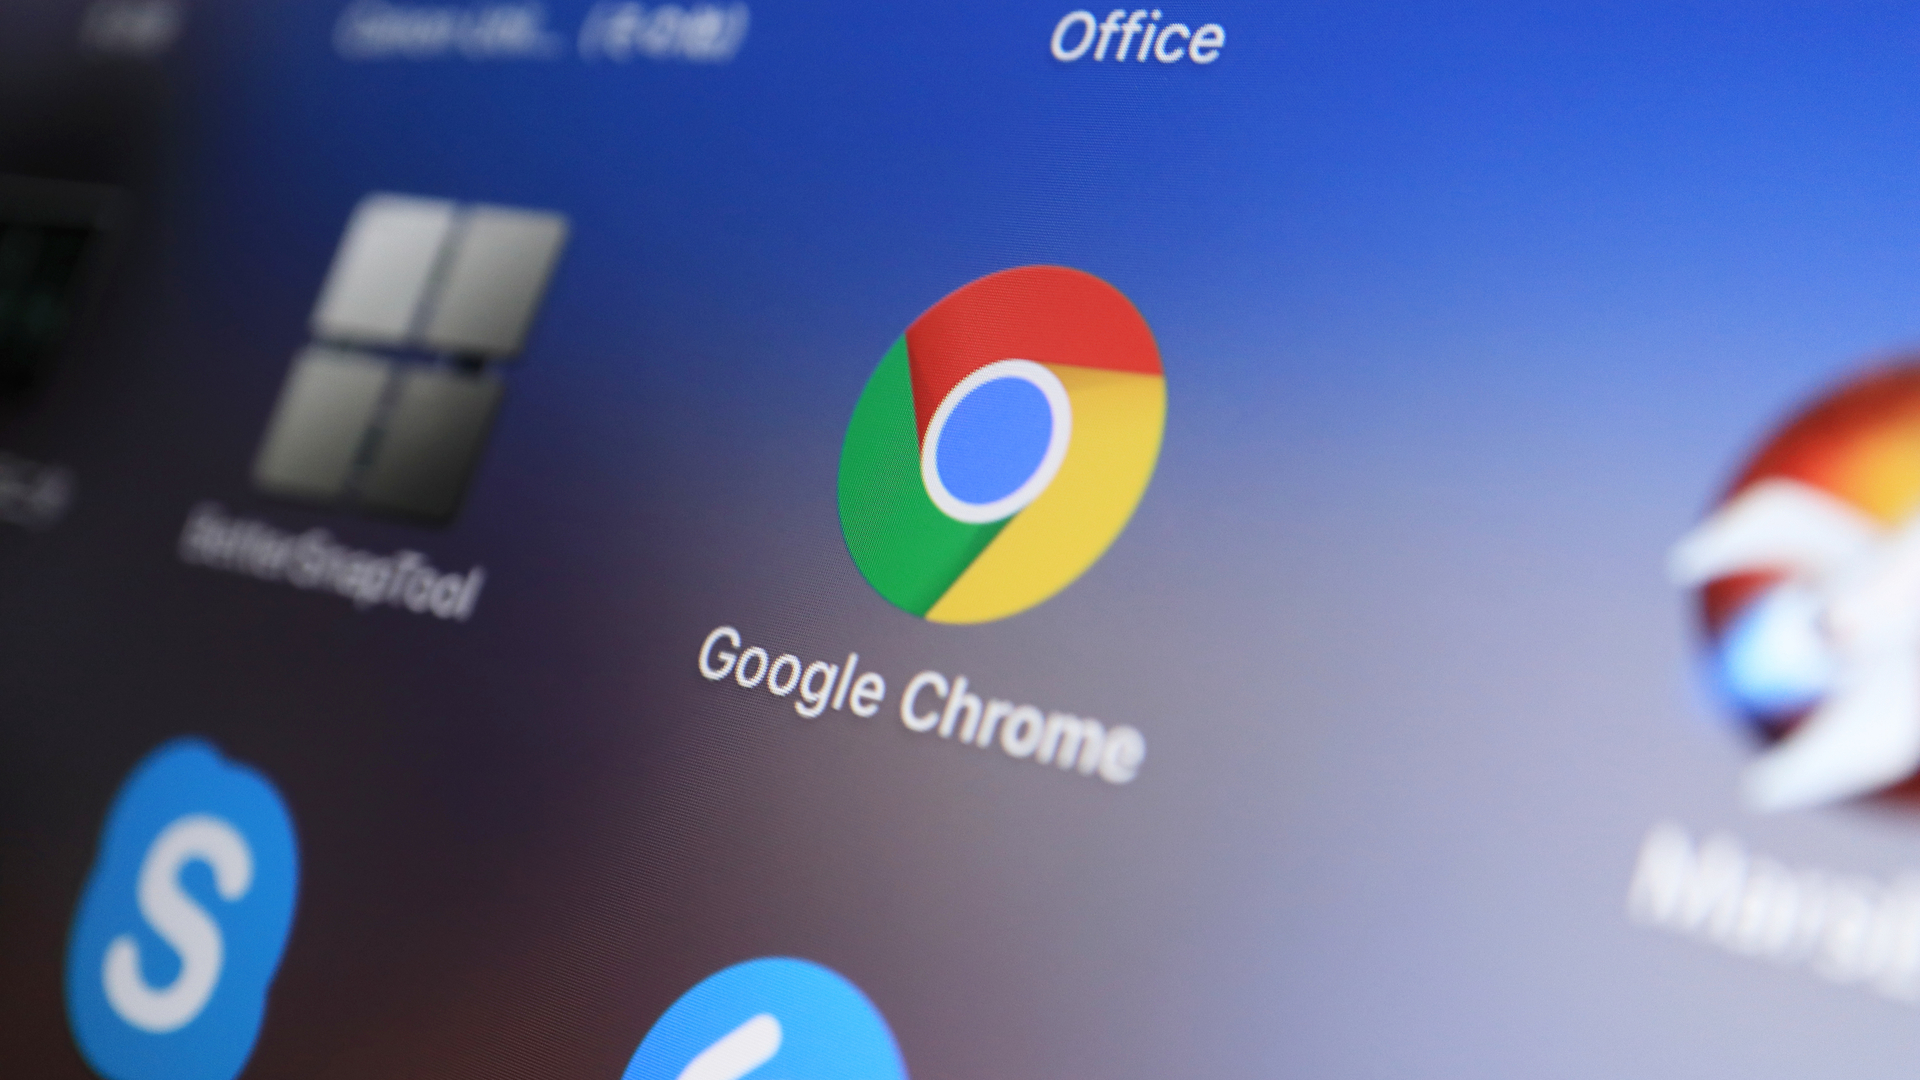 Uh-oh, Chrome’s Incognito Mode still collects your data, according to updated fine print